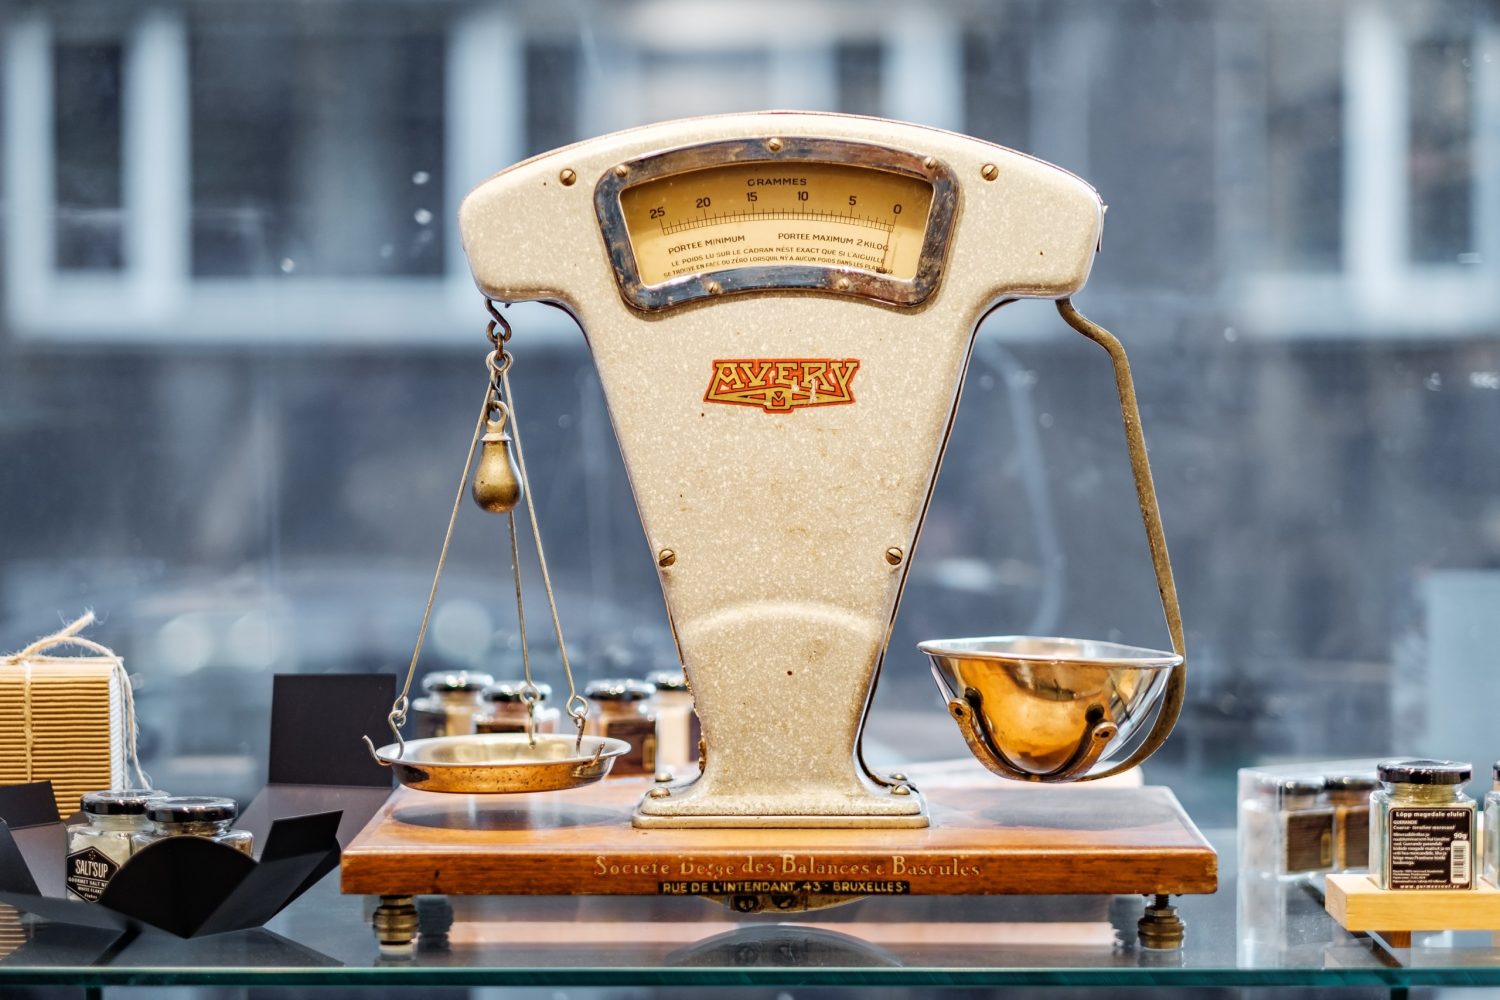 Old fashioned scales